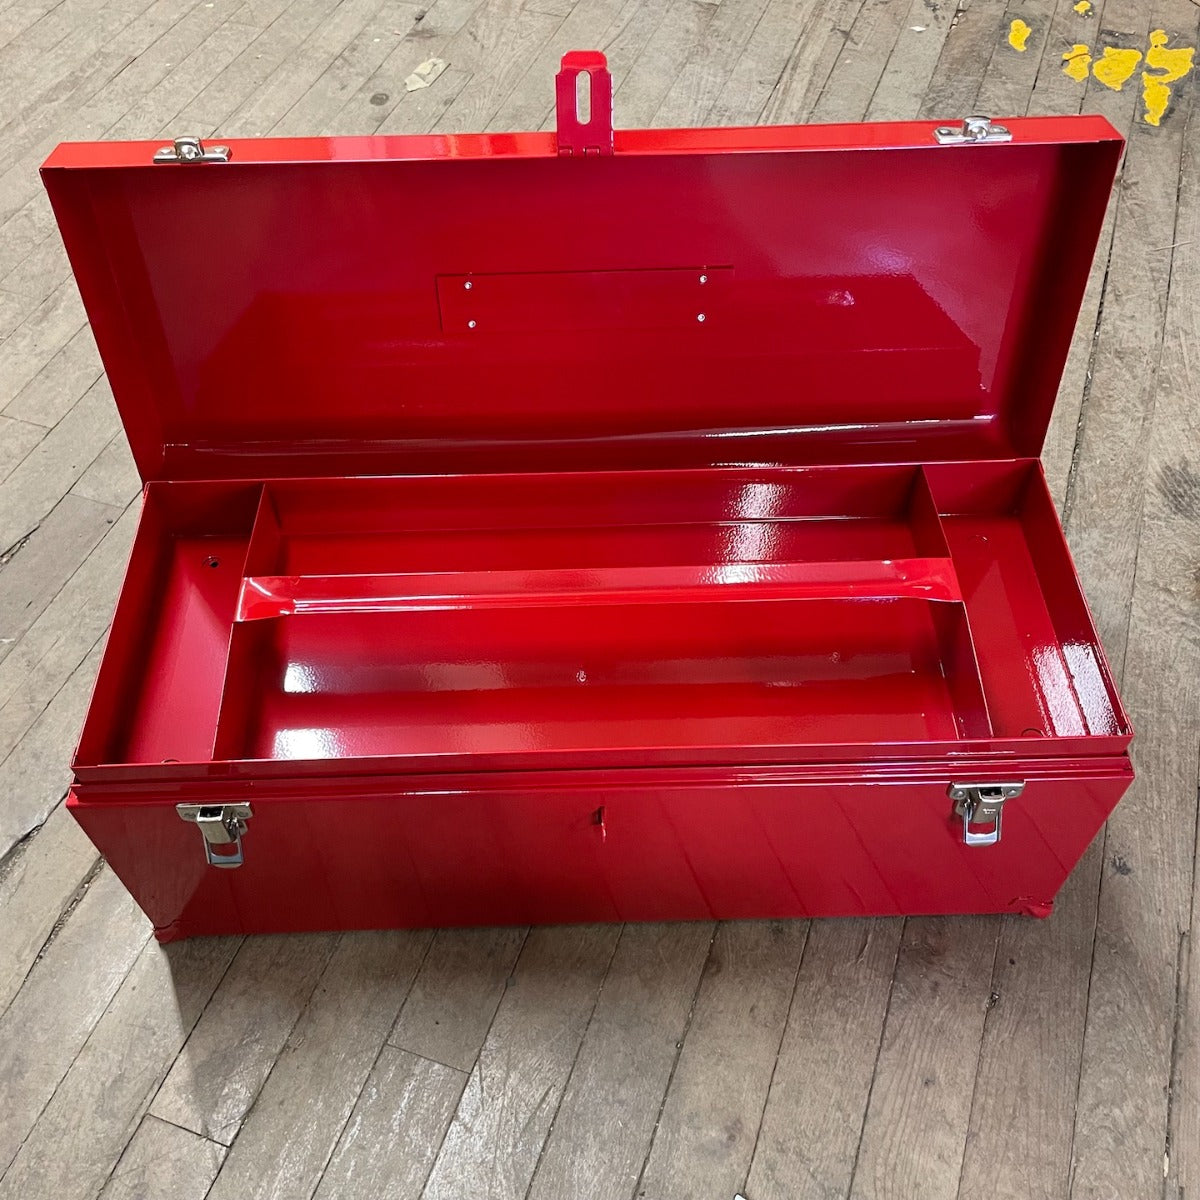 Valley Red Metal Tool Box w/ Handle and Tray 22 1/2 x 8 1/2 x 9 (VR –  Harry J. Epstein Co.